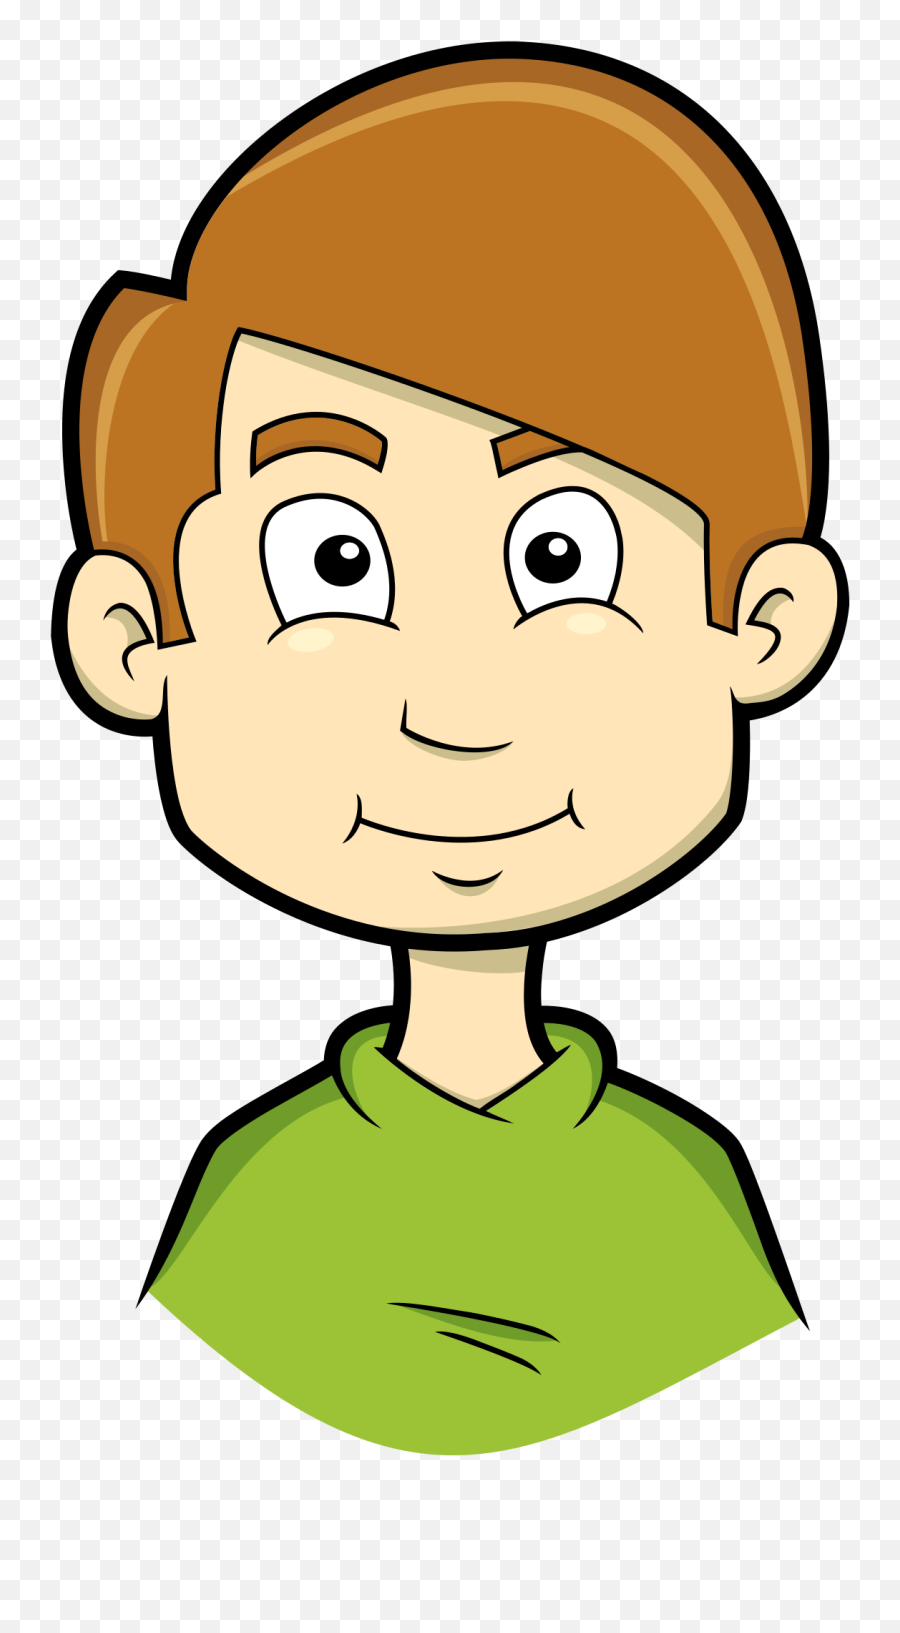 Happy Boy Face Clipart - Clipart Suggest Probability Of Coloured Balls Emoji,Clipart Faces Emotions Black And White Big Smile